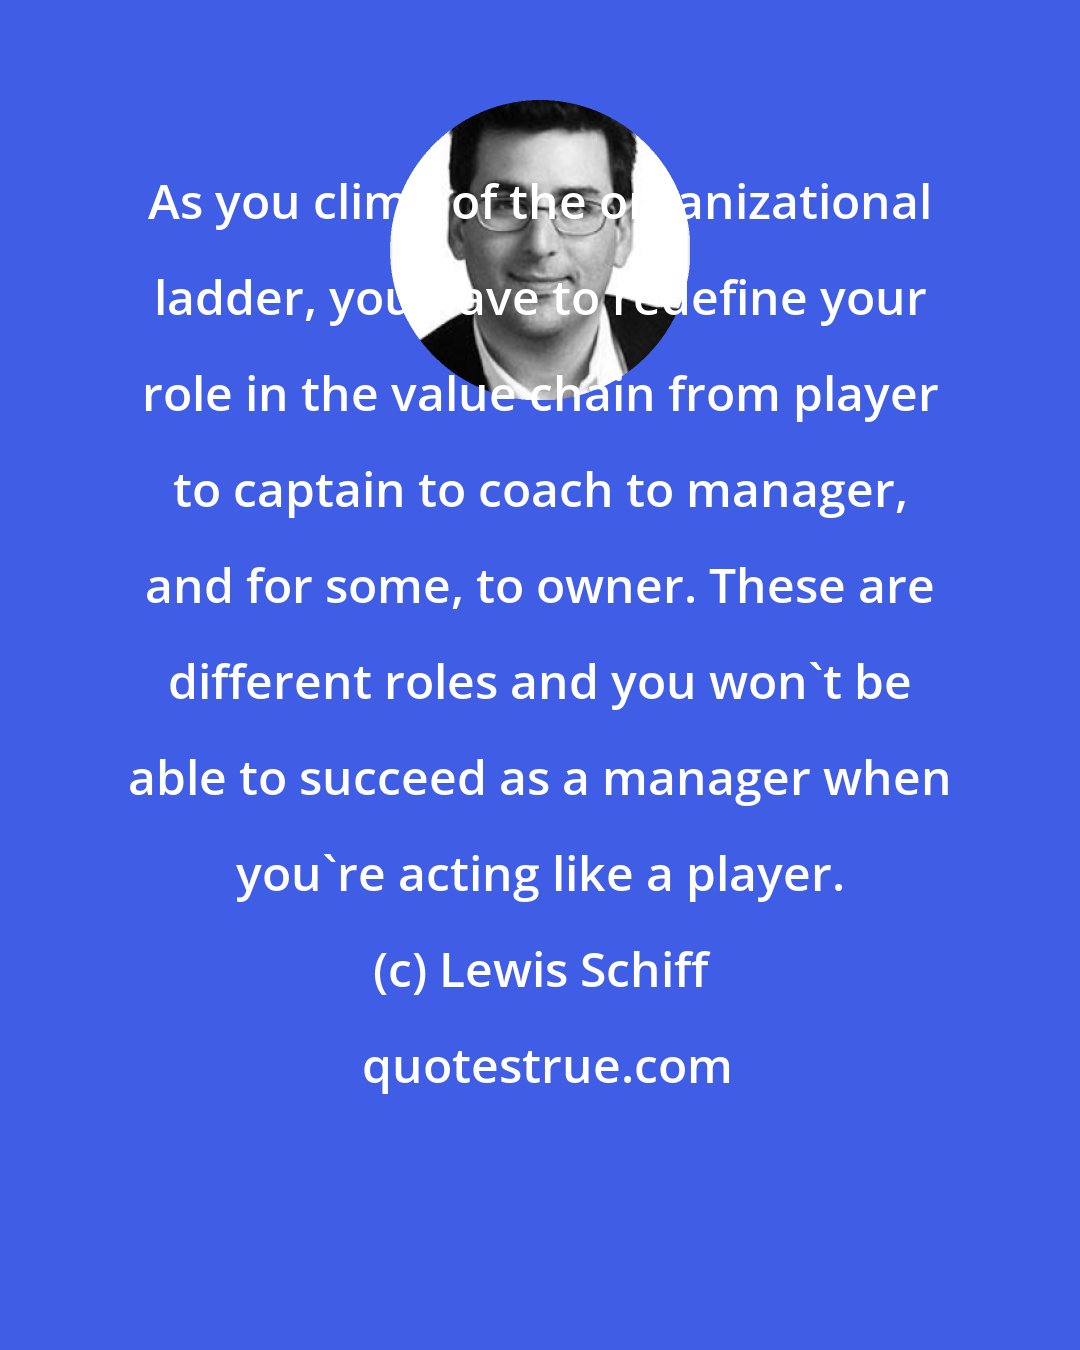 Lewis Schiff: As you climb of the organizational ladder, you have to redefine your role in the value chain from player to captain to coach to manager, and for some, to owner. These are different roles and you won't be able to succeed as a manager when you're acting like a player.